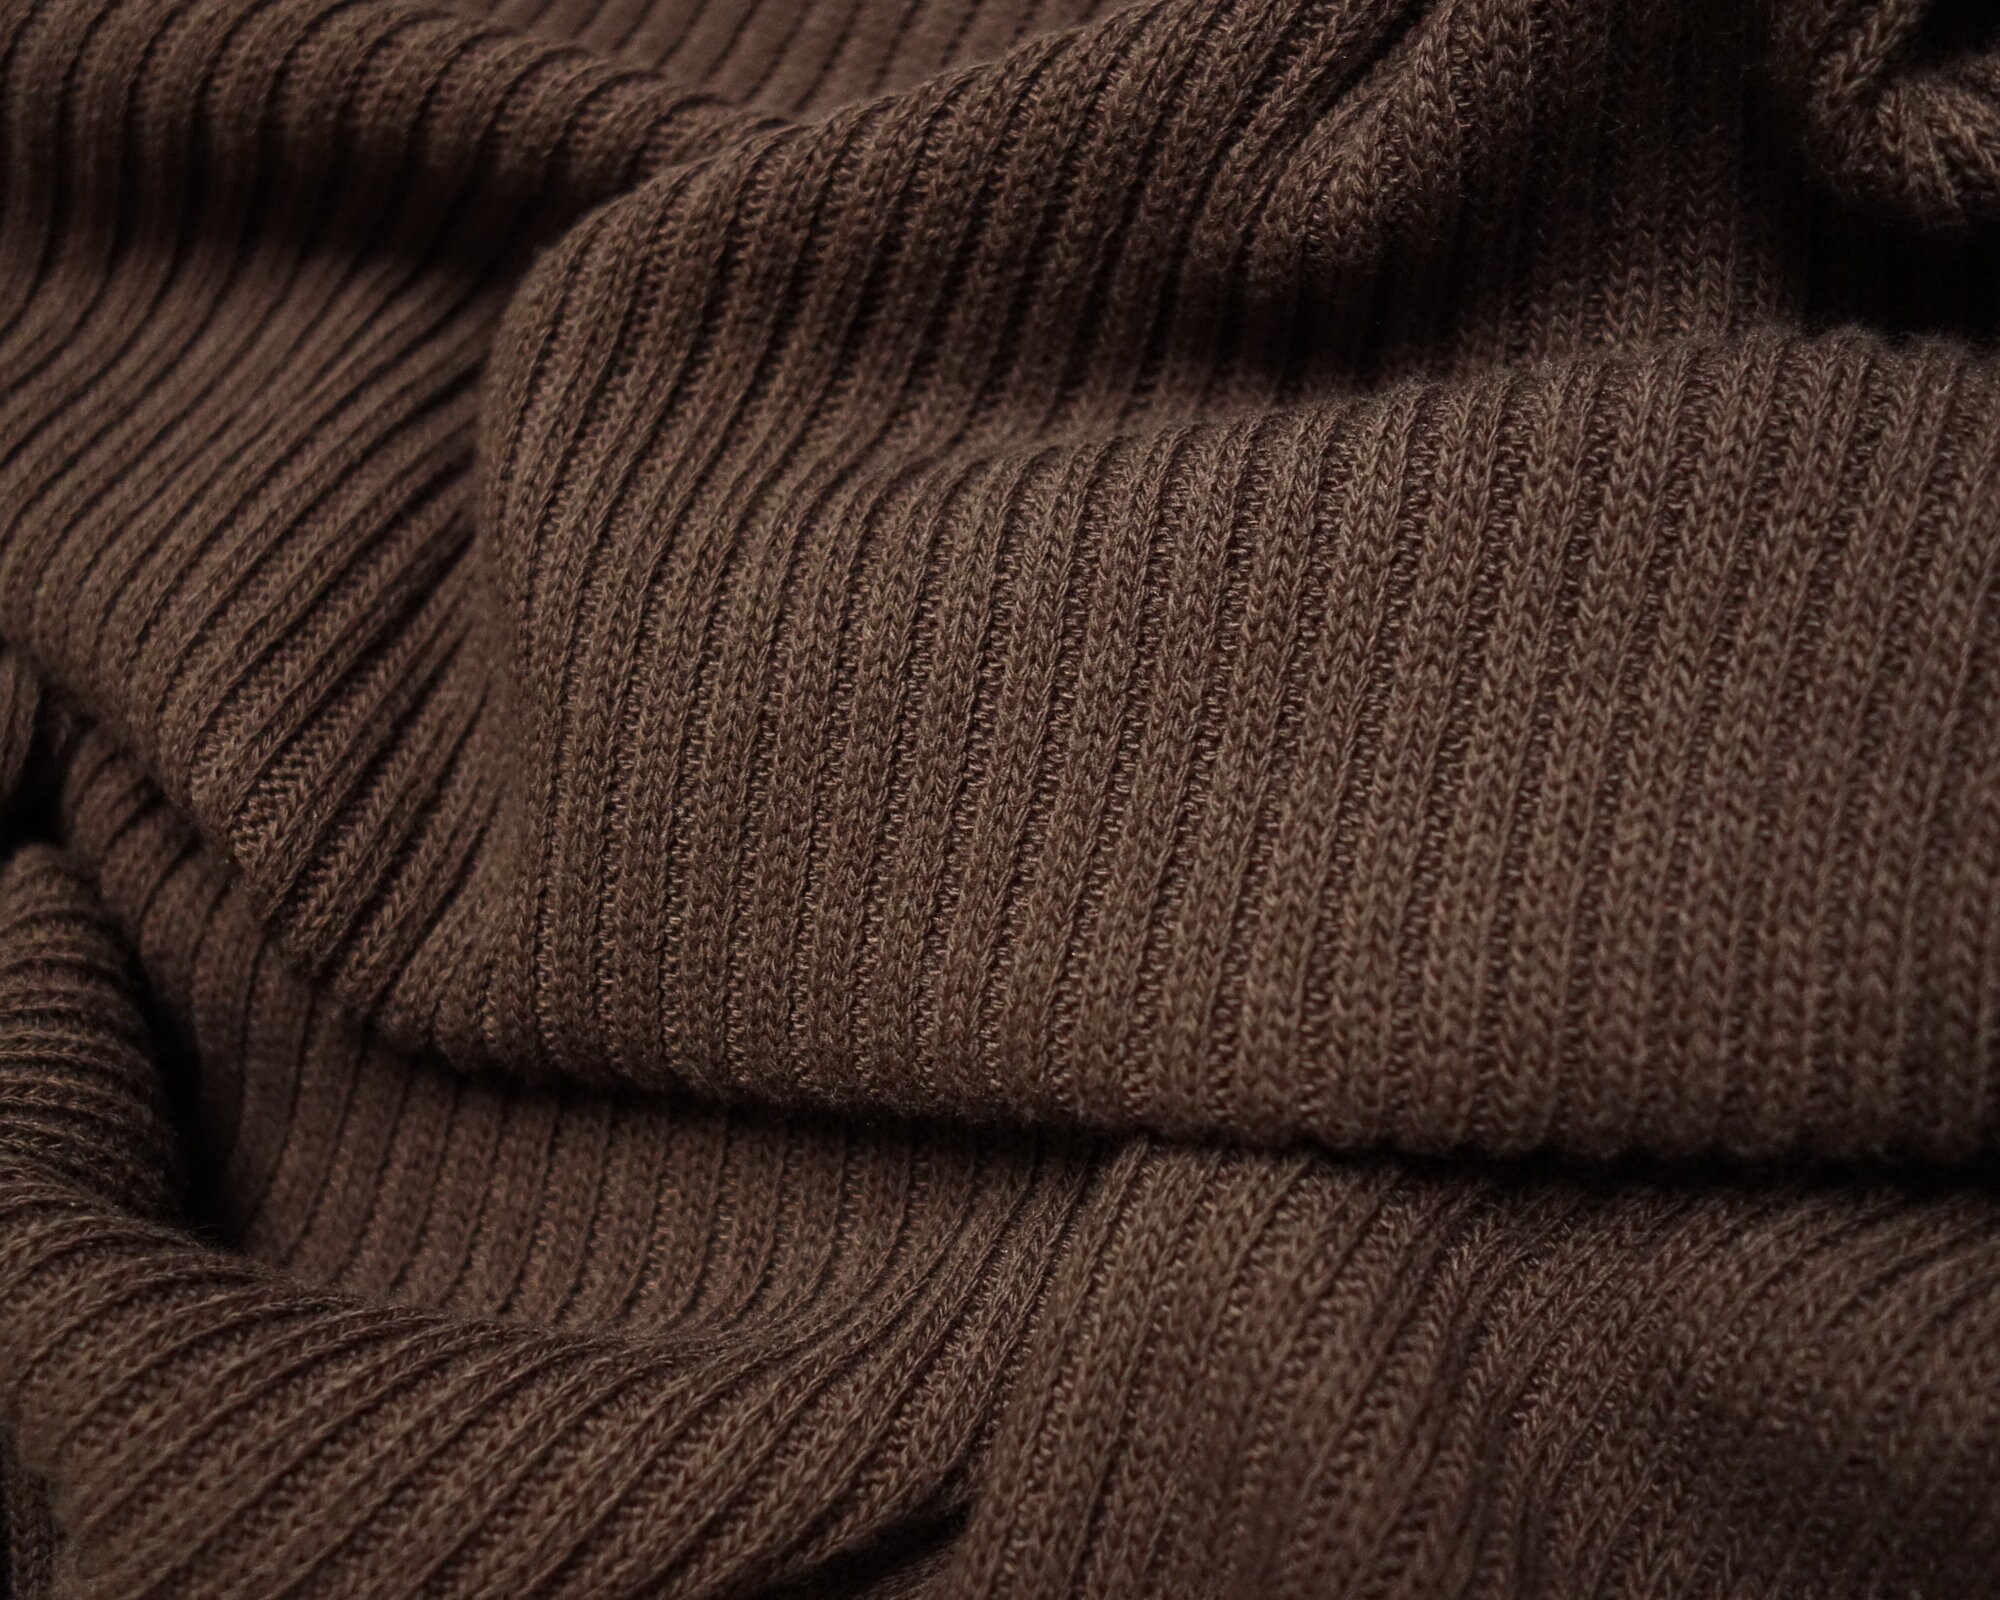 Dark Brown Cotton Blend 2x2 Sweater Rib Knit - 10 Oz Deadstock Fabric By The Yard